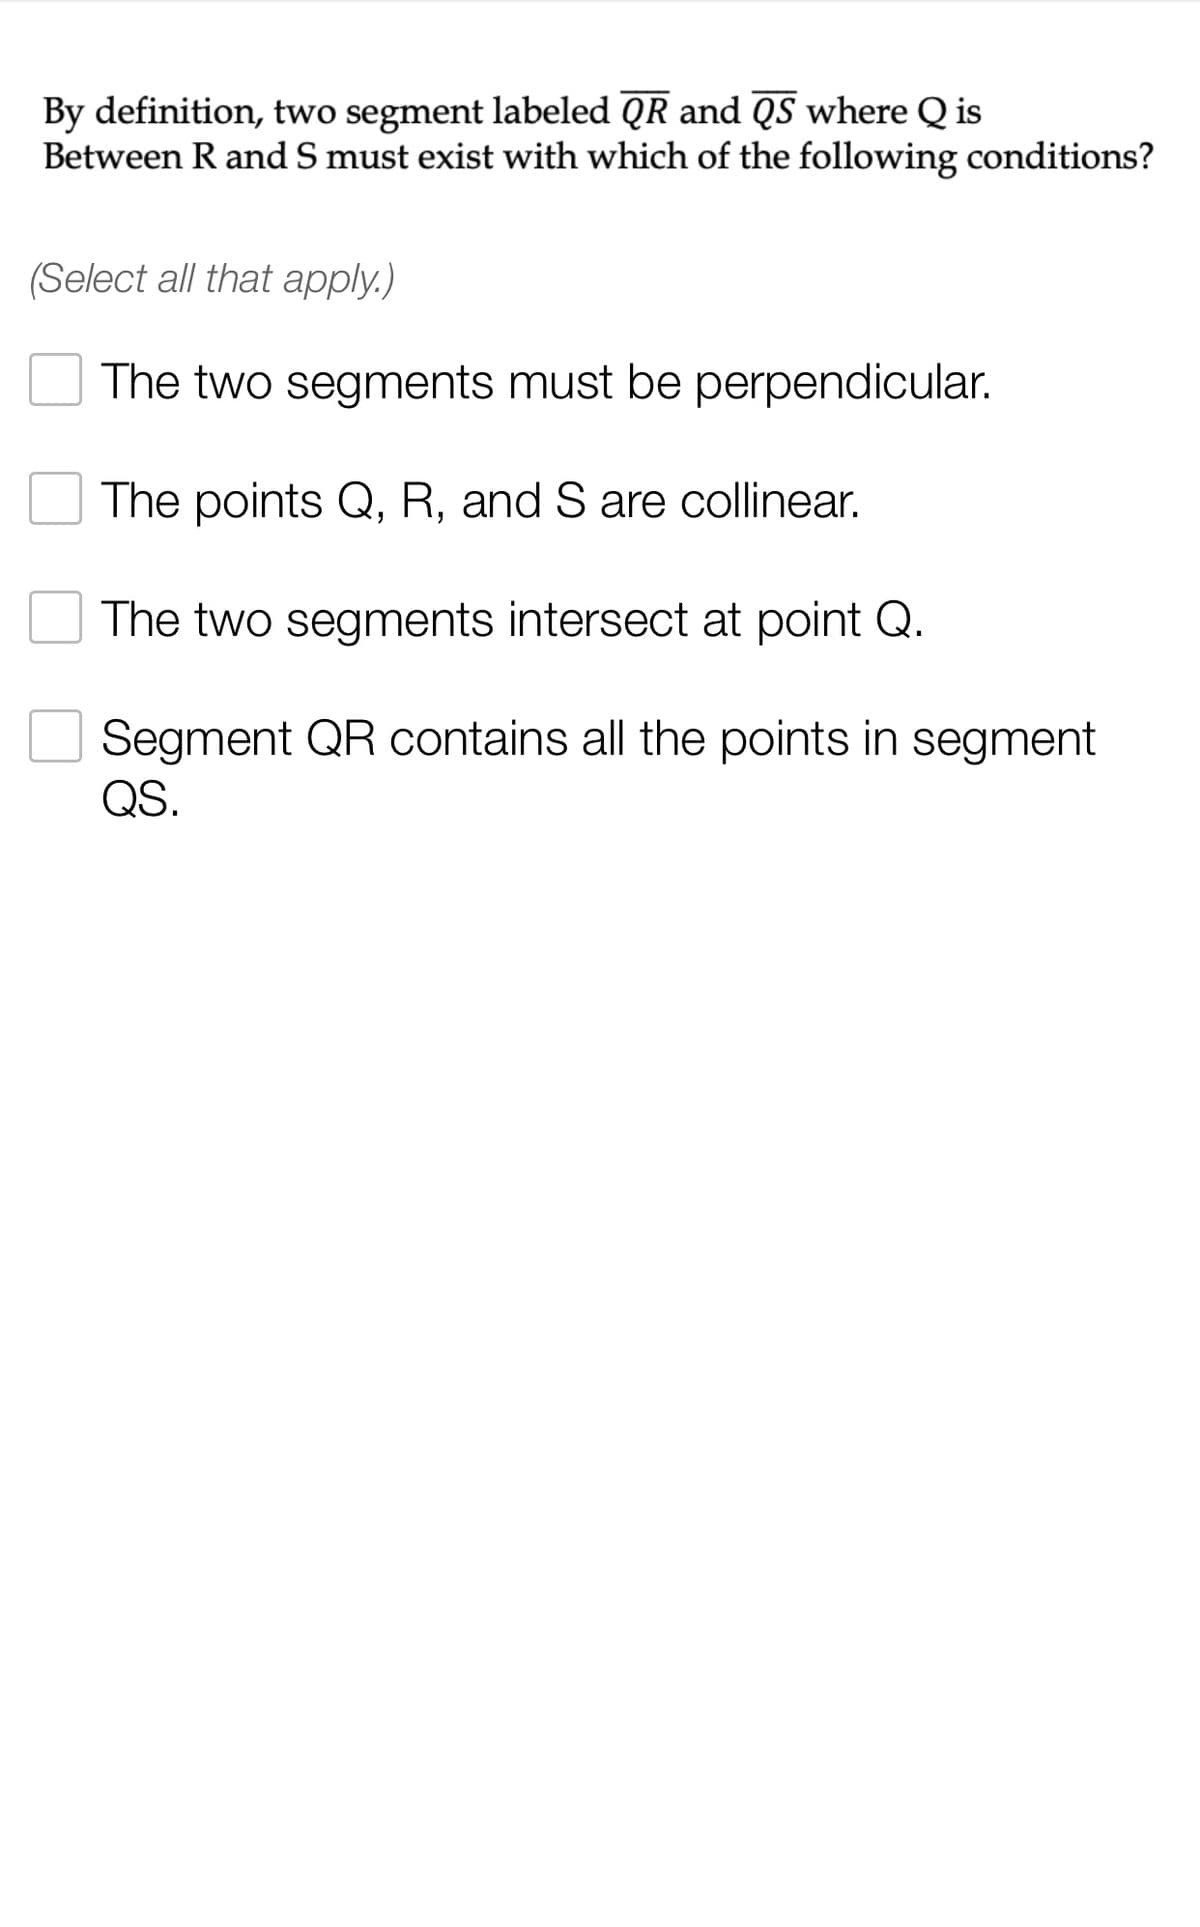 By definition, two segment labeled QR and QS where Q is
Between R and S must exist with which of the following conditions?
(Select all that apply.)
The two segments must be perpendicular.
The points Q, R, and S are collinear.
The two segments intersect at point Q.
Segment QR contains all the points in segment
QS.
